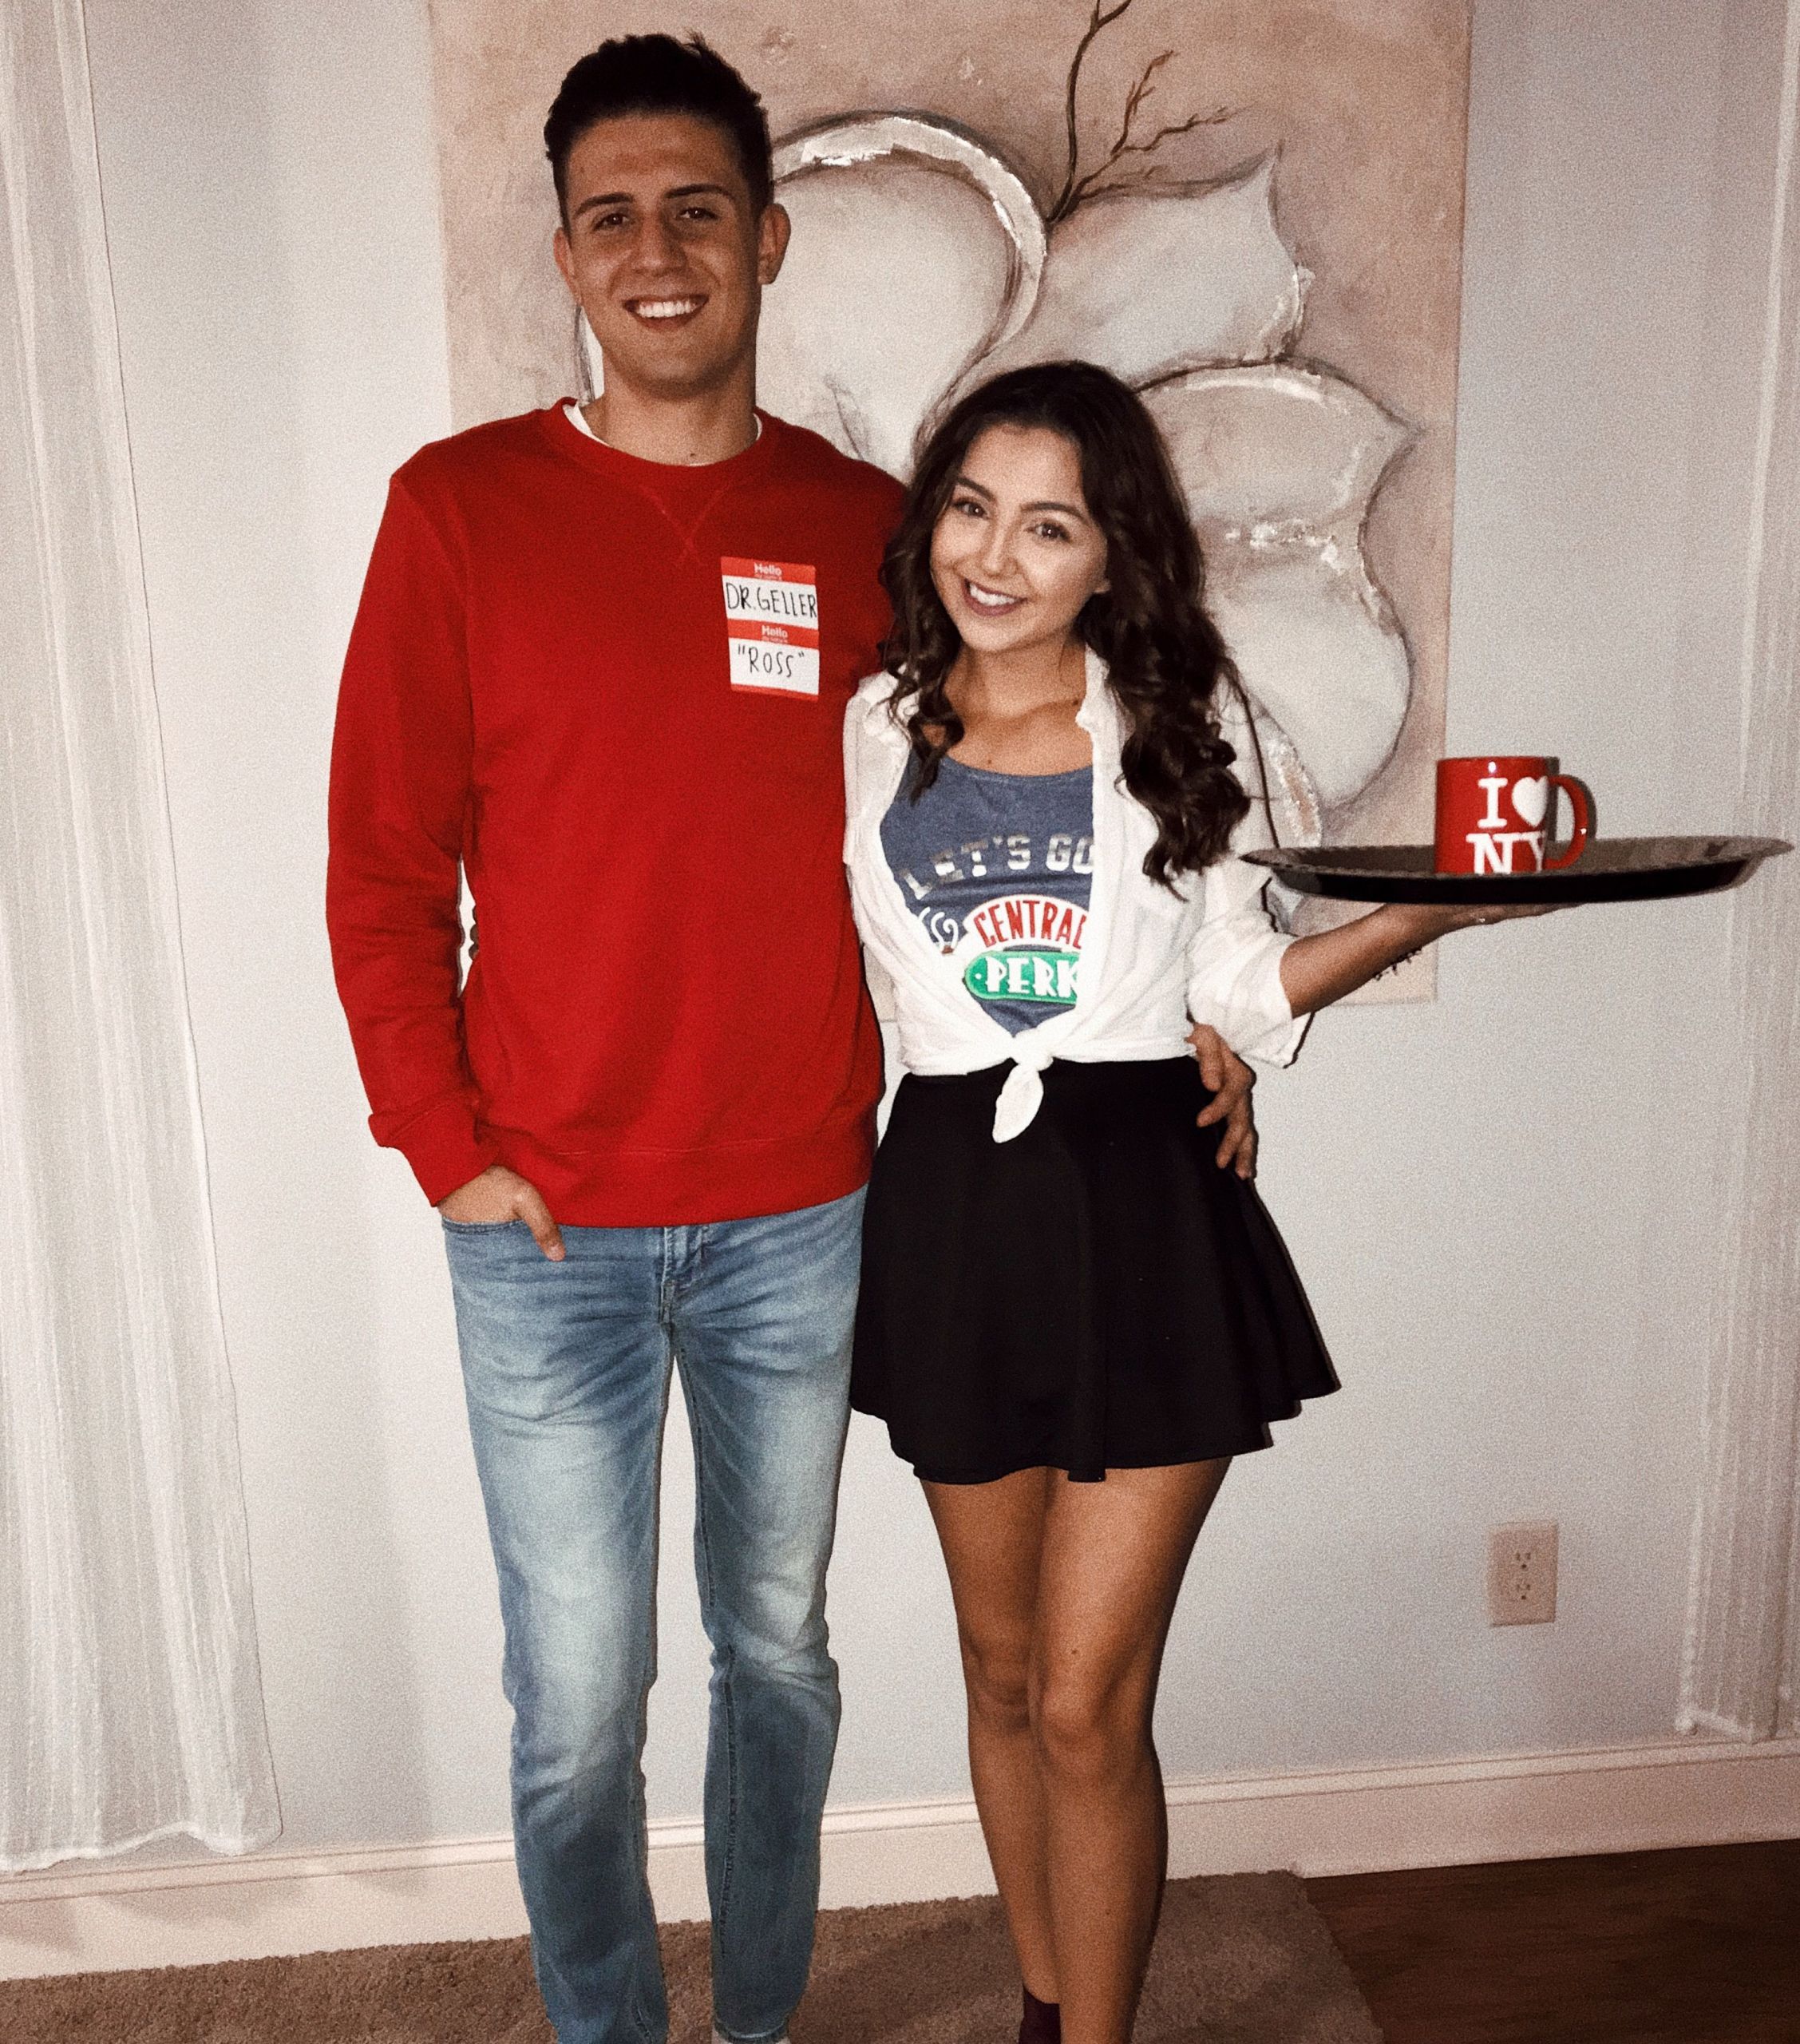 Halloween Costumes Ideas 2020
 Rachel and Ross from Friends costume in 2019